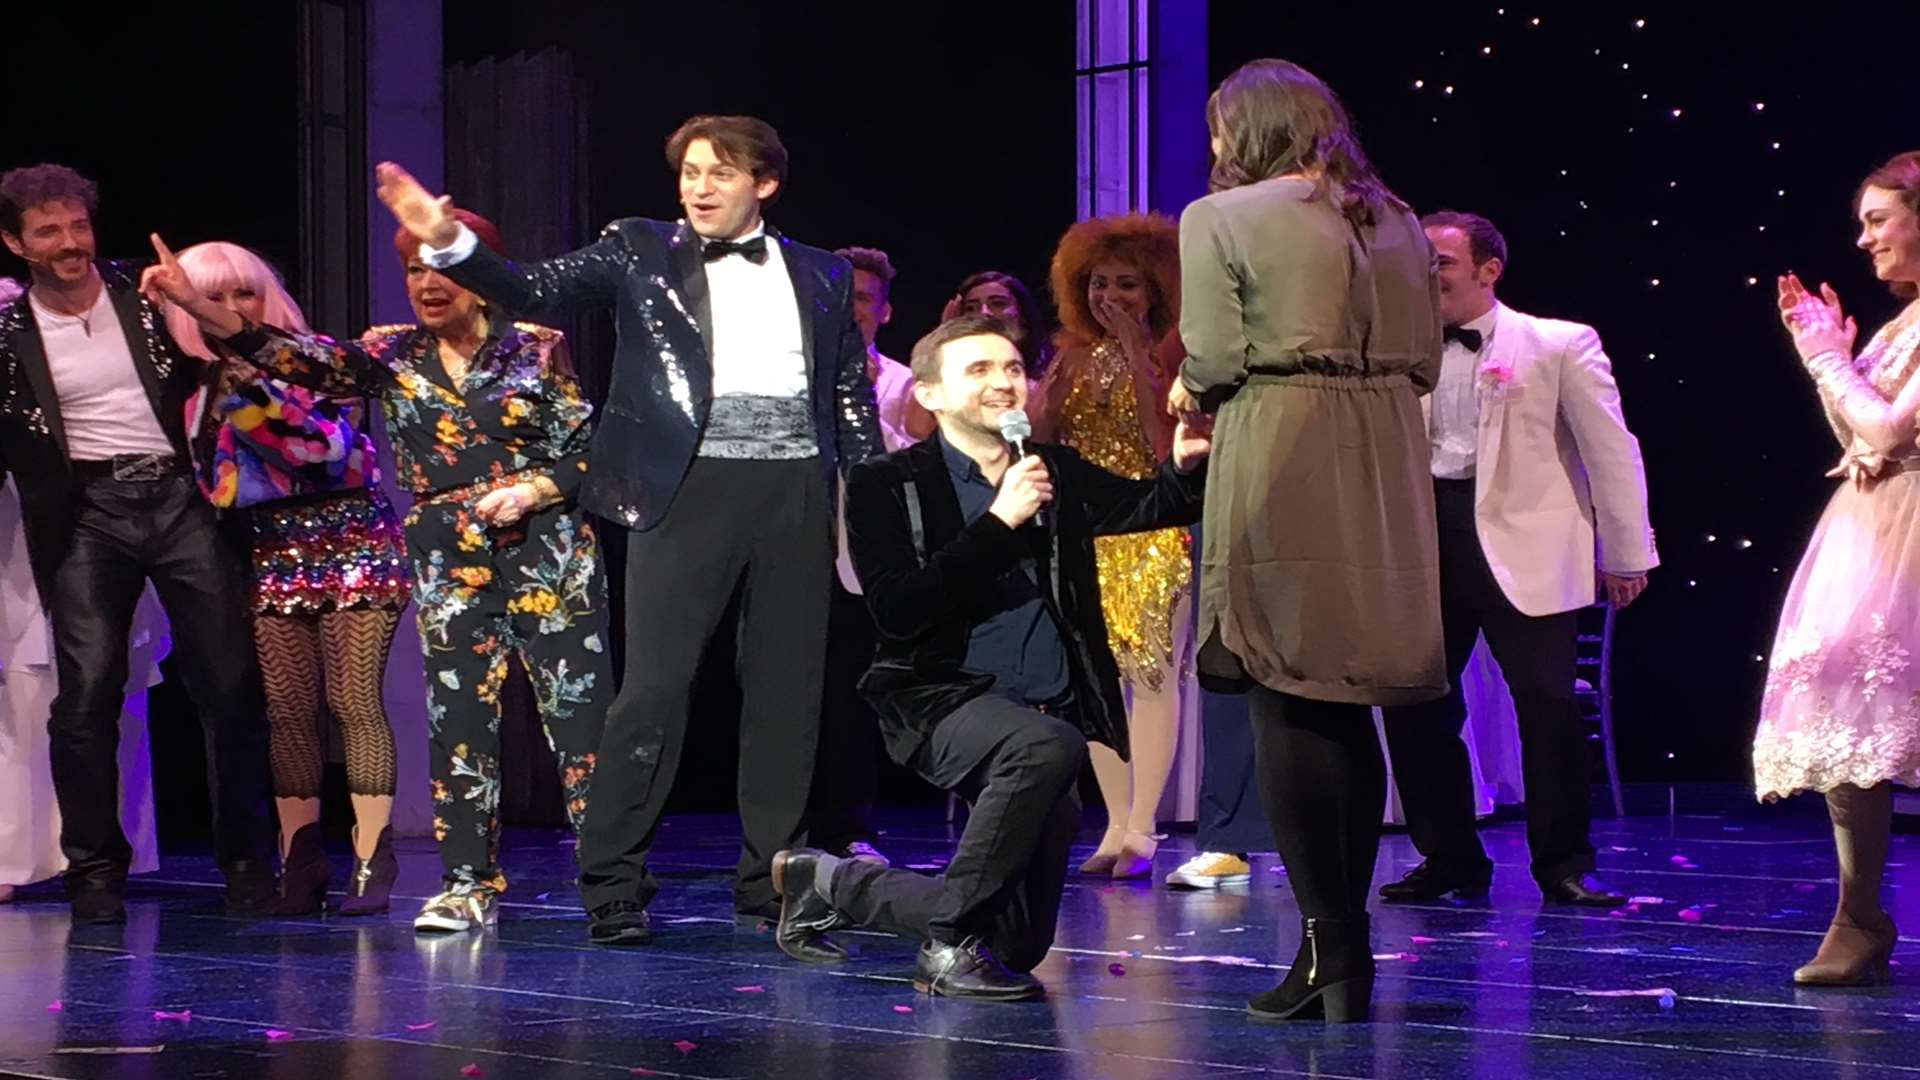 Kevin gets down on one knee at the end of the performance. Picture: Orchard Theatre